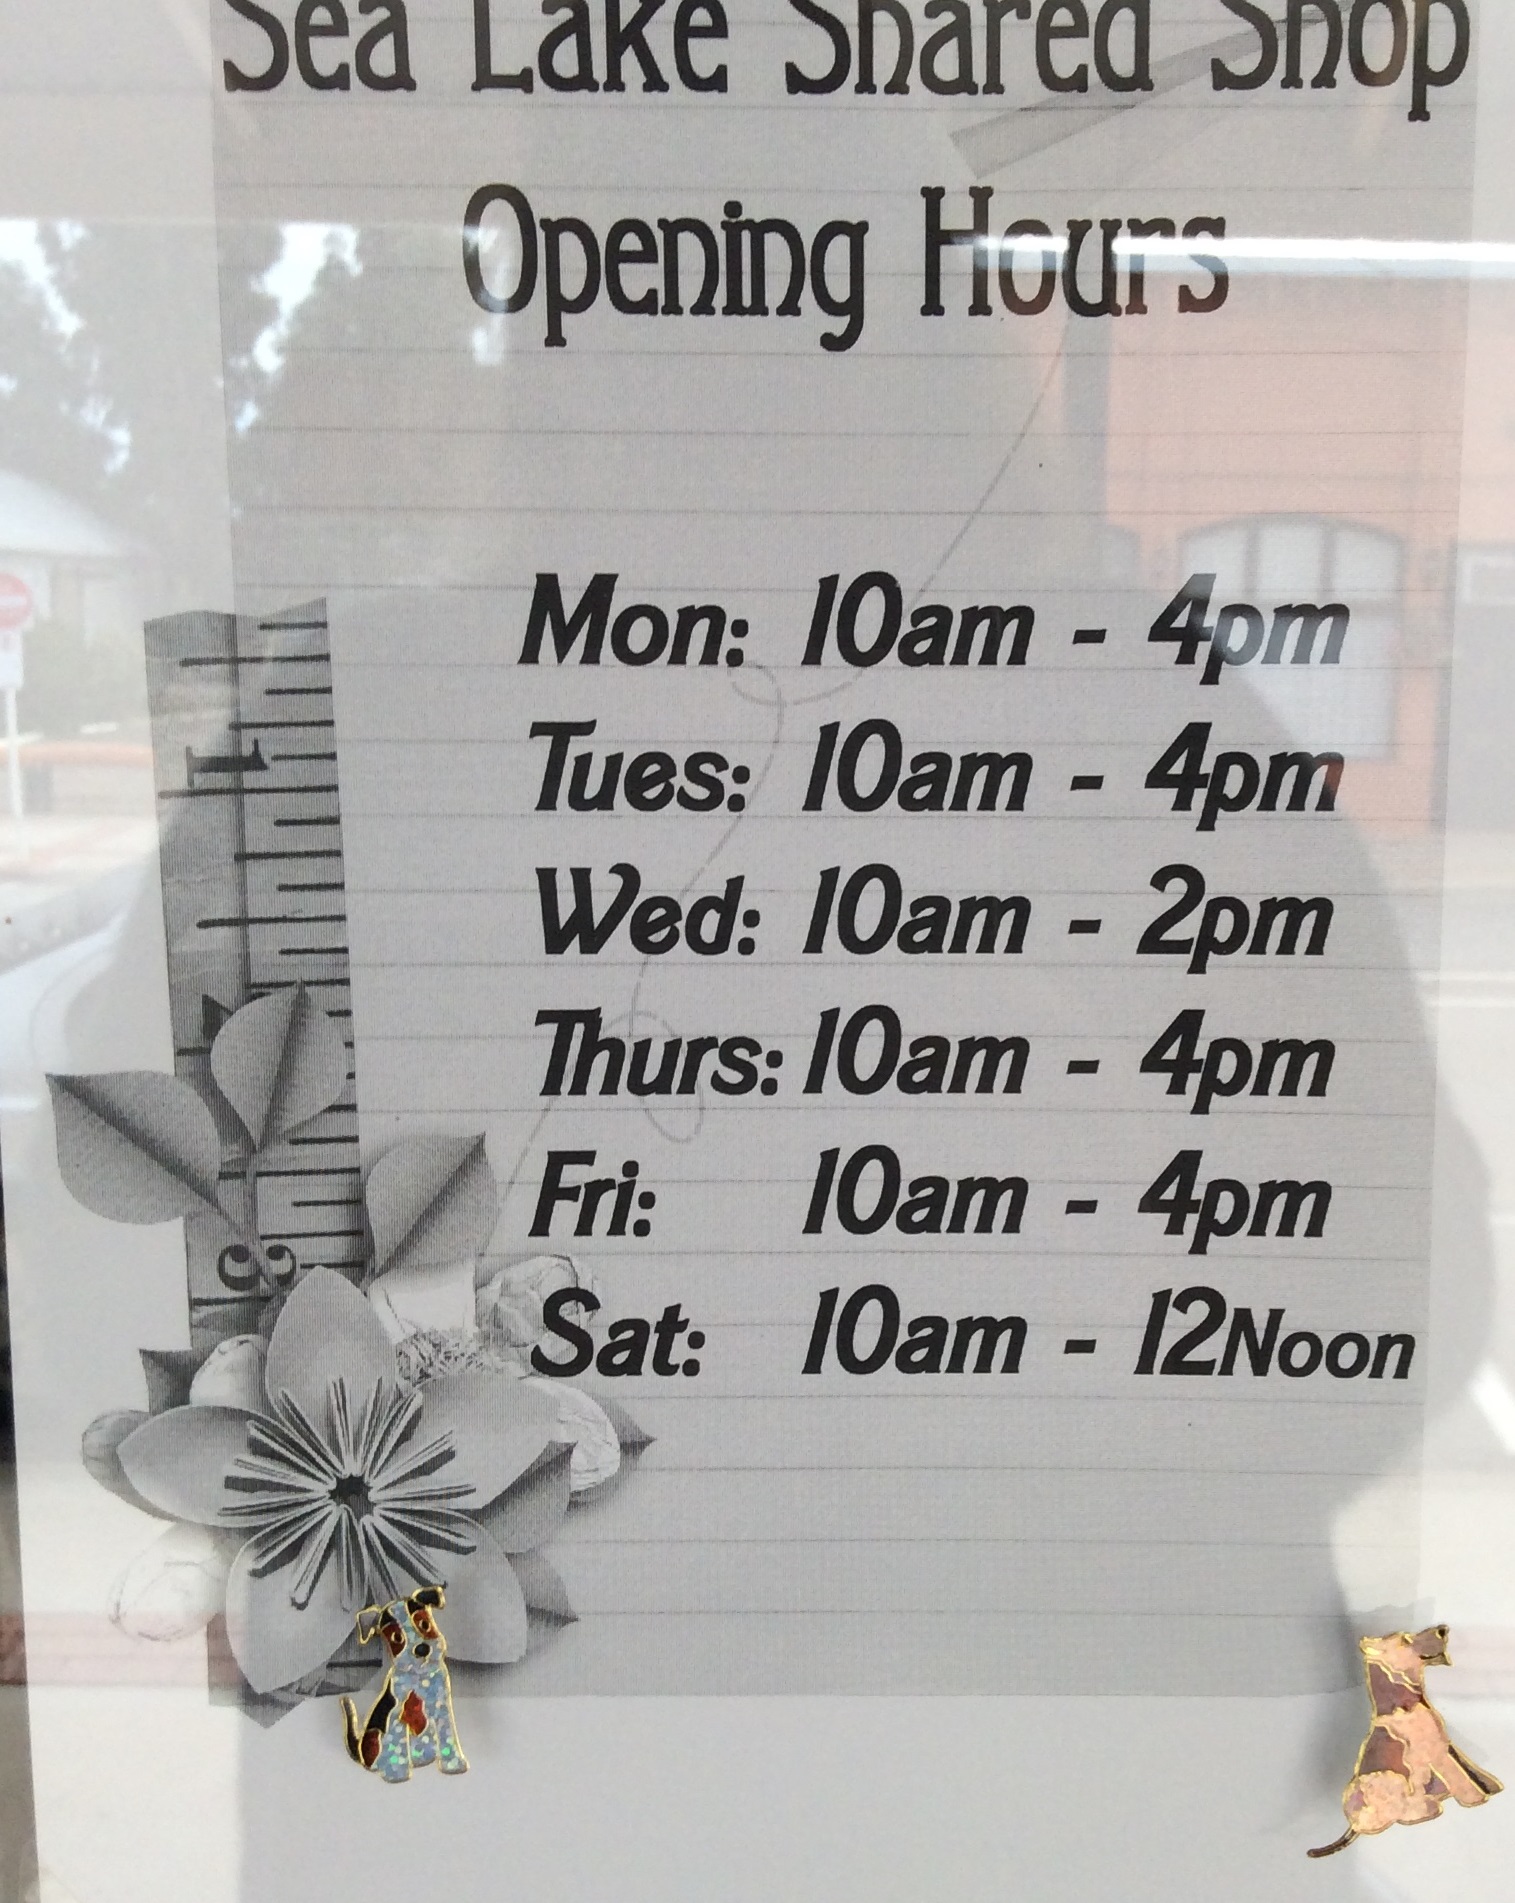 Shared Shop Opening Hours